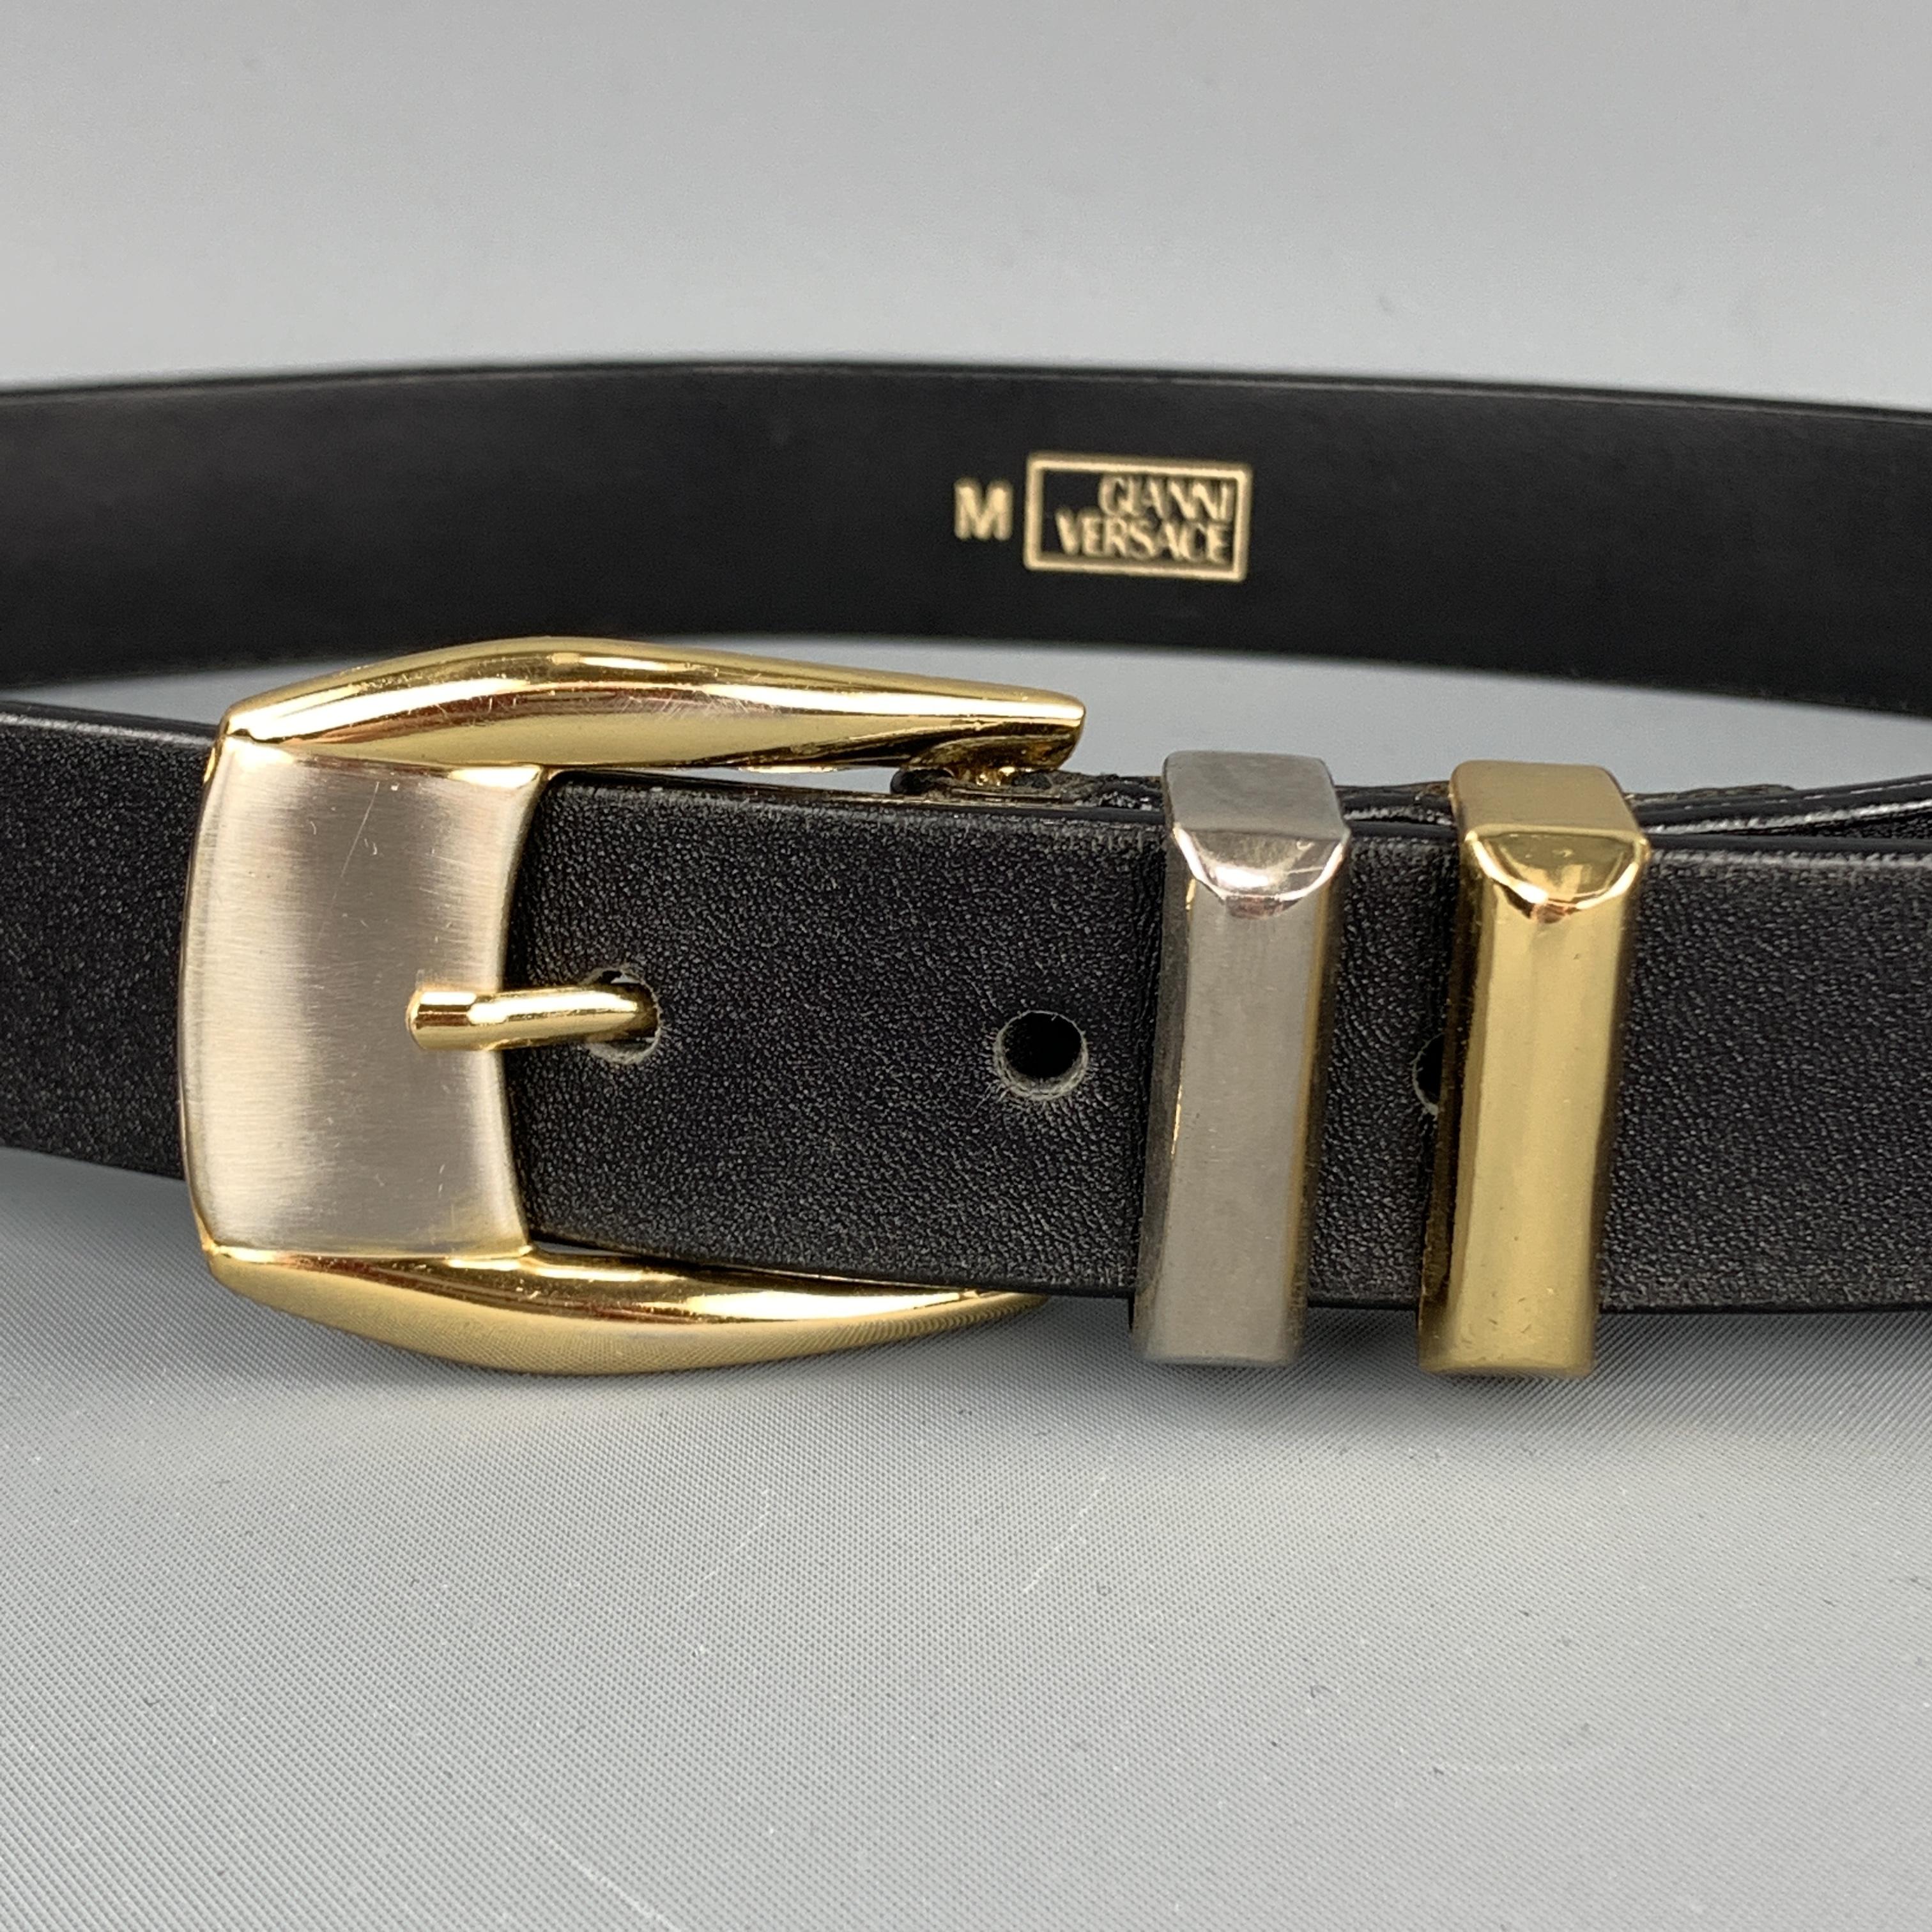 Vintage late 1980's - early 1990's GIANNI VERSACE waist belt features a smooth black leather strap with with silver tone embossed studs, gold and silver tone buckle with metal loops, and cutout hardware with Medusa head medallions. Removed from a